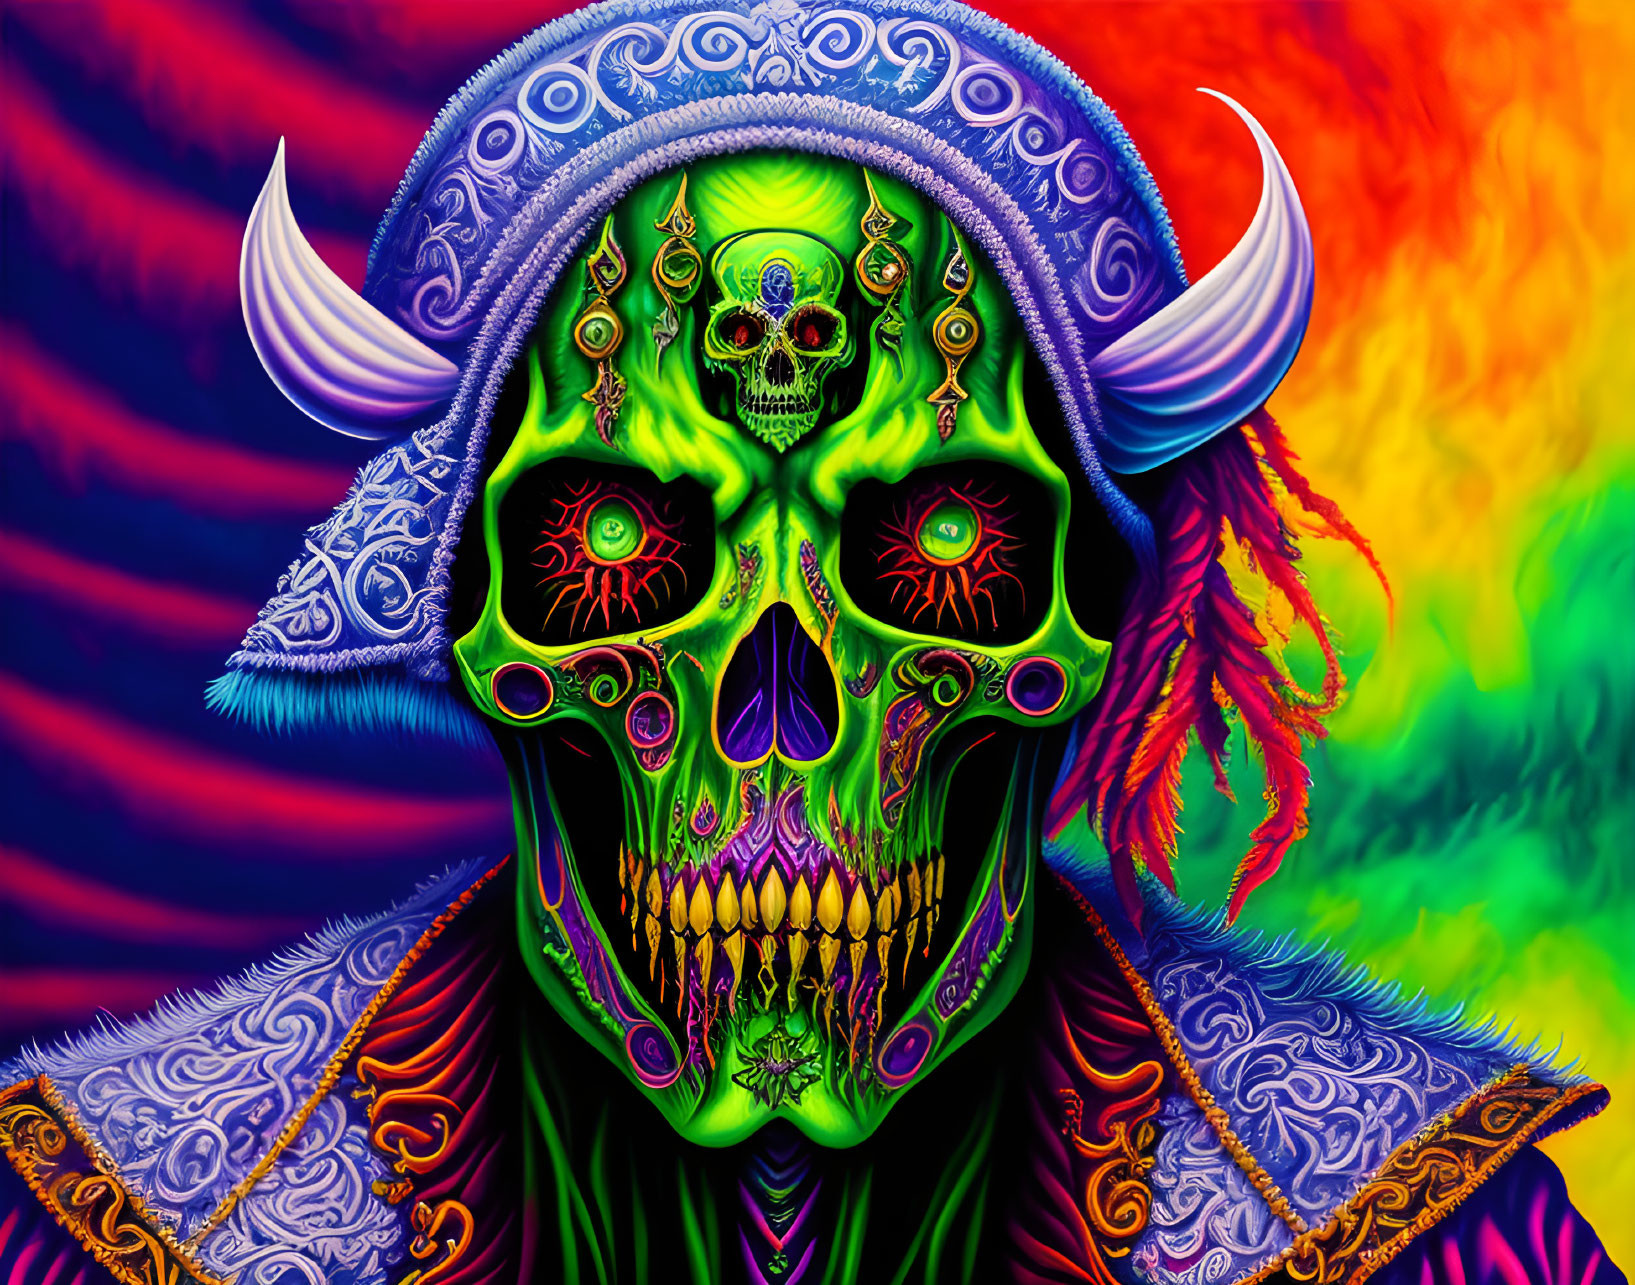 Colorful Psychedelic Skull with Ornate Decorations and Horns on Rainbow Swirl Background